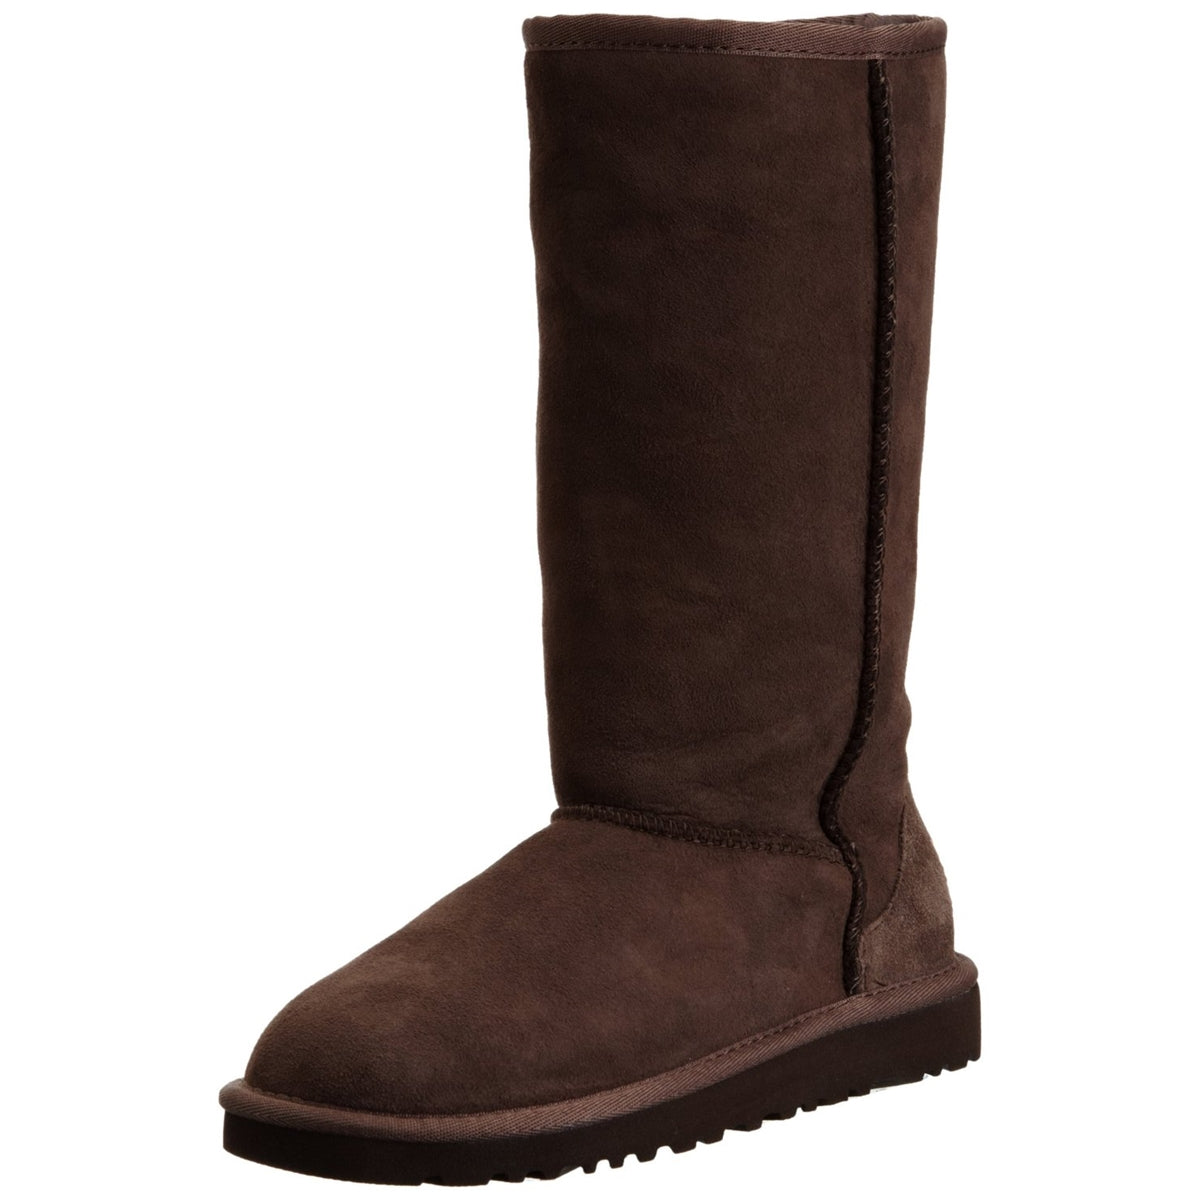 Ugg Girl Classic Tall Boots